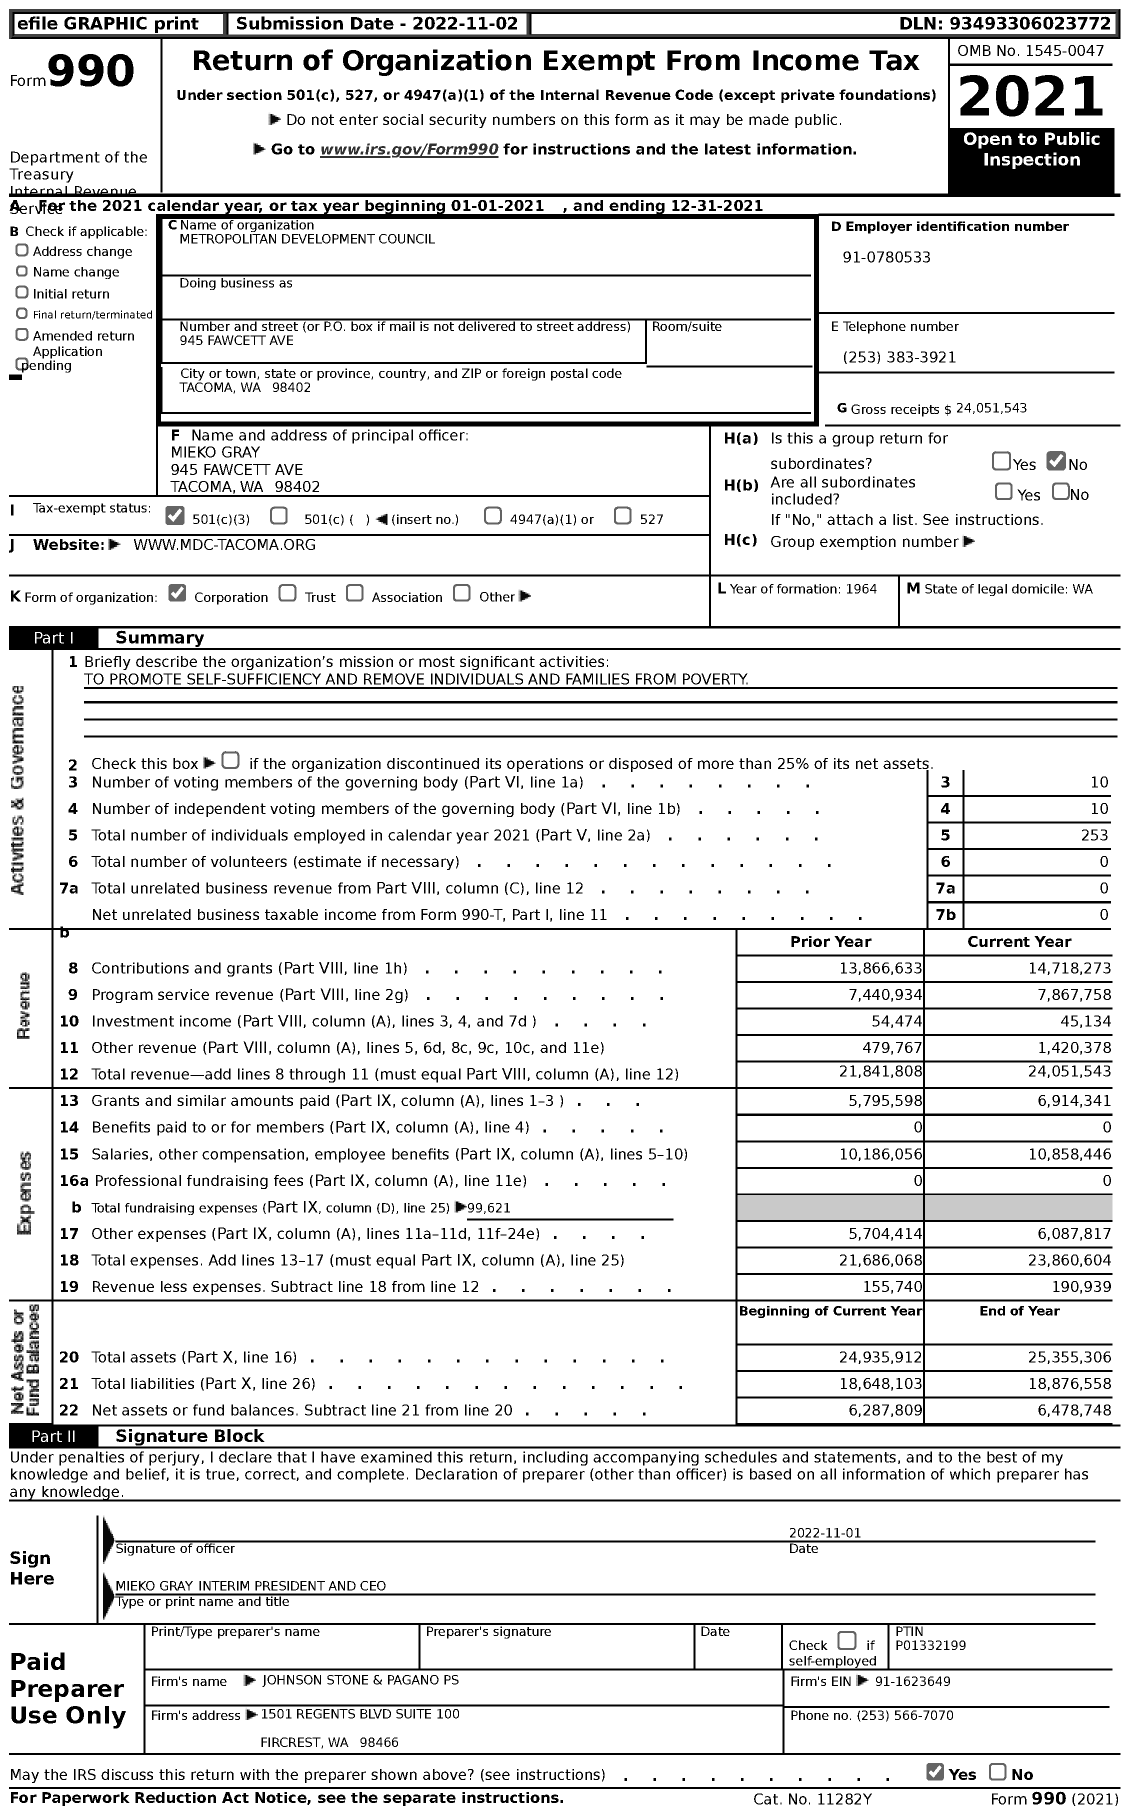 Image of first page of 2021 Form 990 for Metropolitan Development Council (MDC)